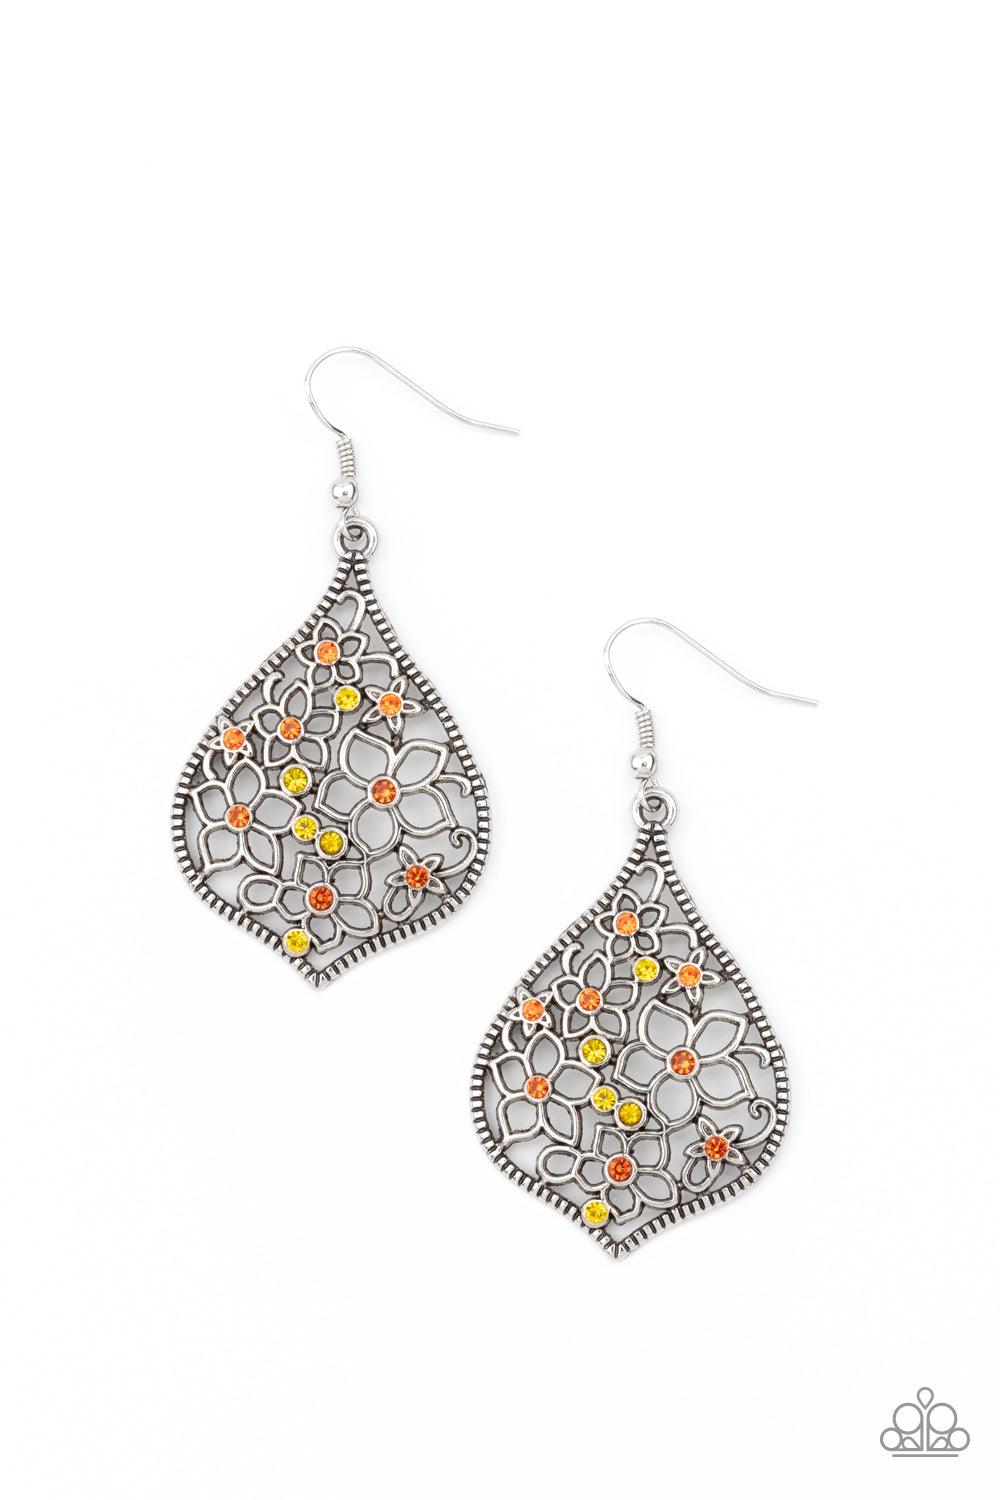 Paparazzi Accessories Full Out Florals - Multi Infused with dainty yellow and orange rhinestones, an airy collection of silver flower frames coalesce inside an ornate silver frame for a colorfully seasonal look. Earring attaches to a standard fishhook fit